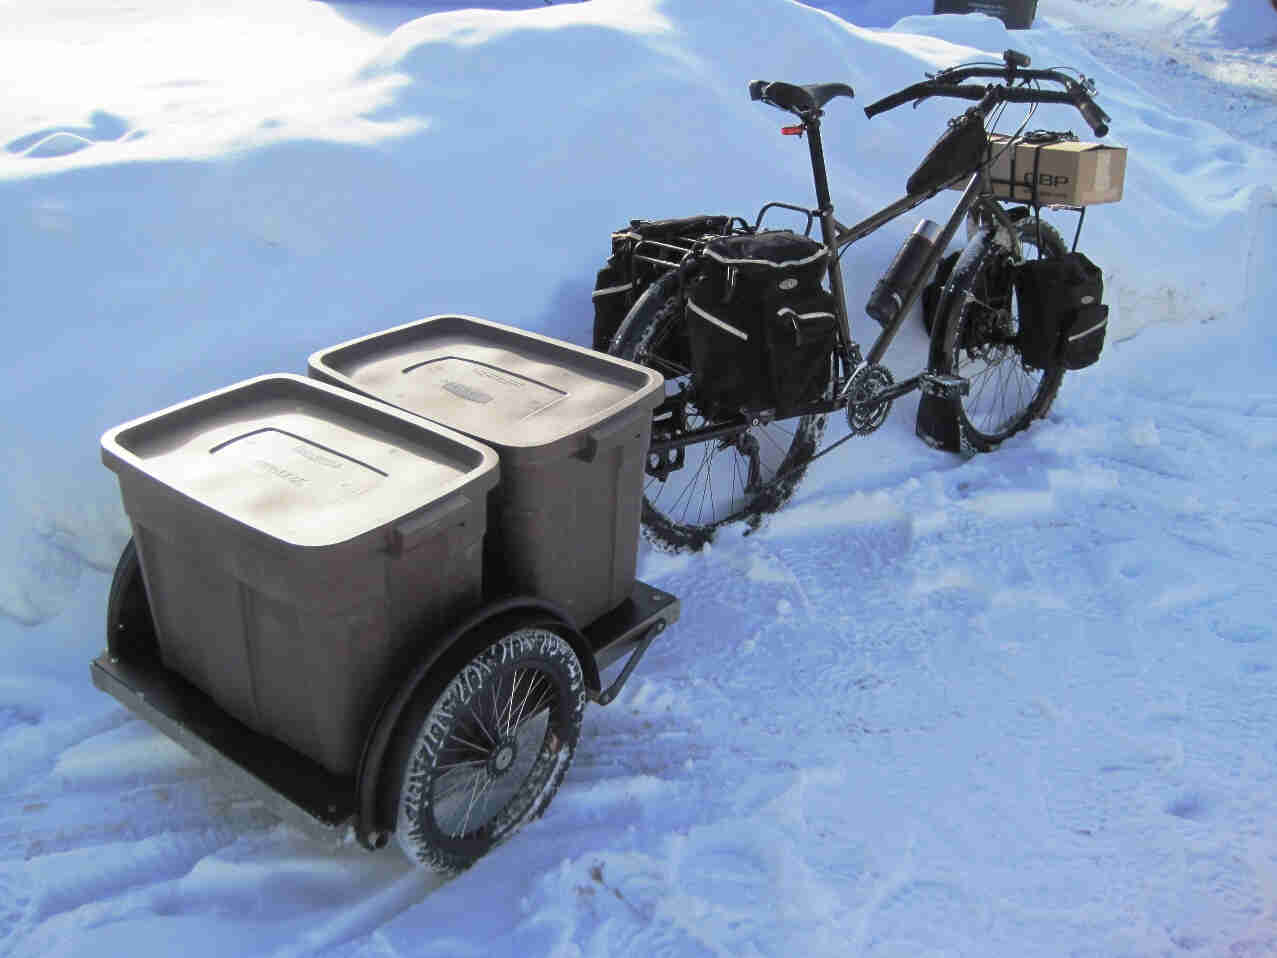 Right side view of a Surly Troll bike with a loaded bike trailer hitched on back, parked against a high snow bank